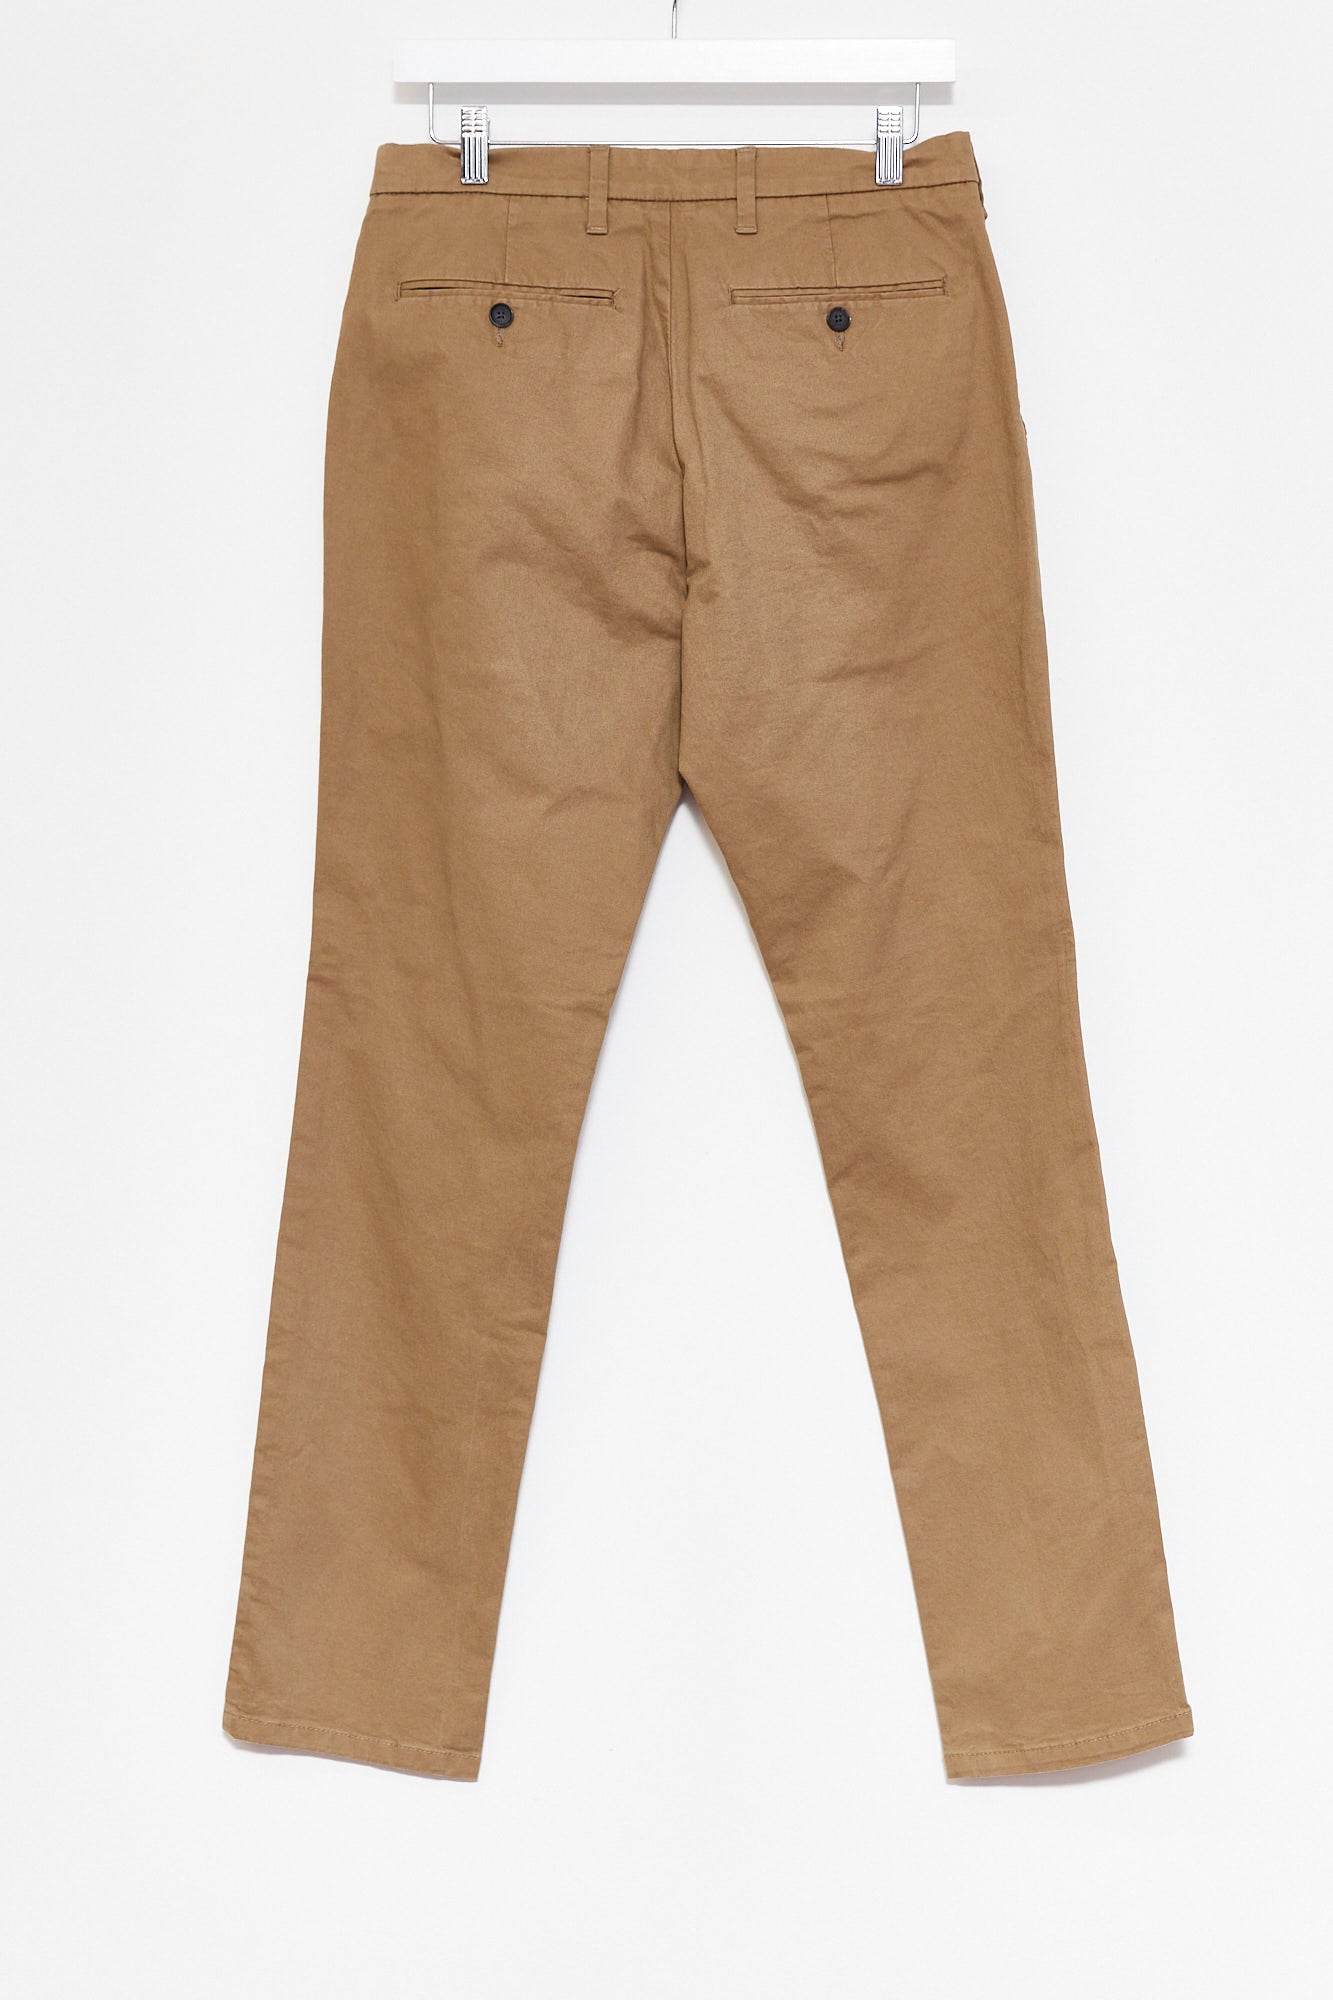 Mens M&S Brown Chino size W30 L31